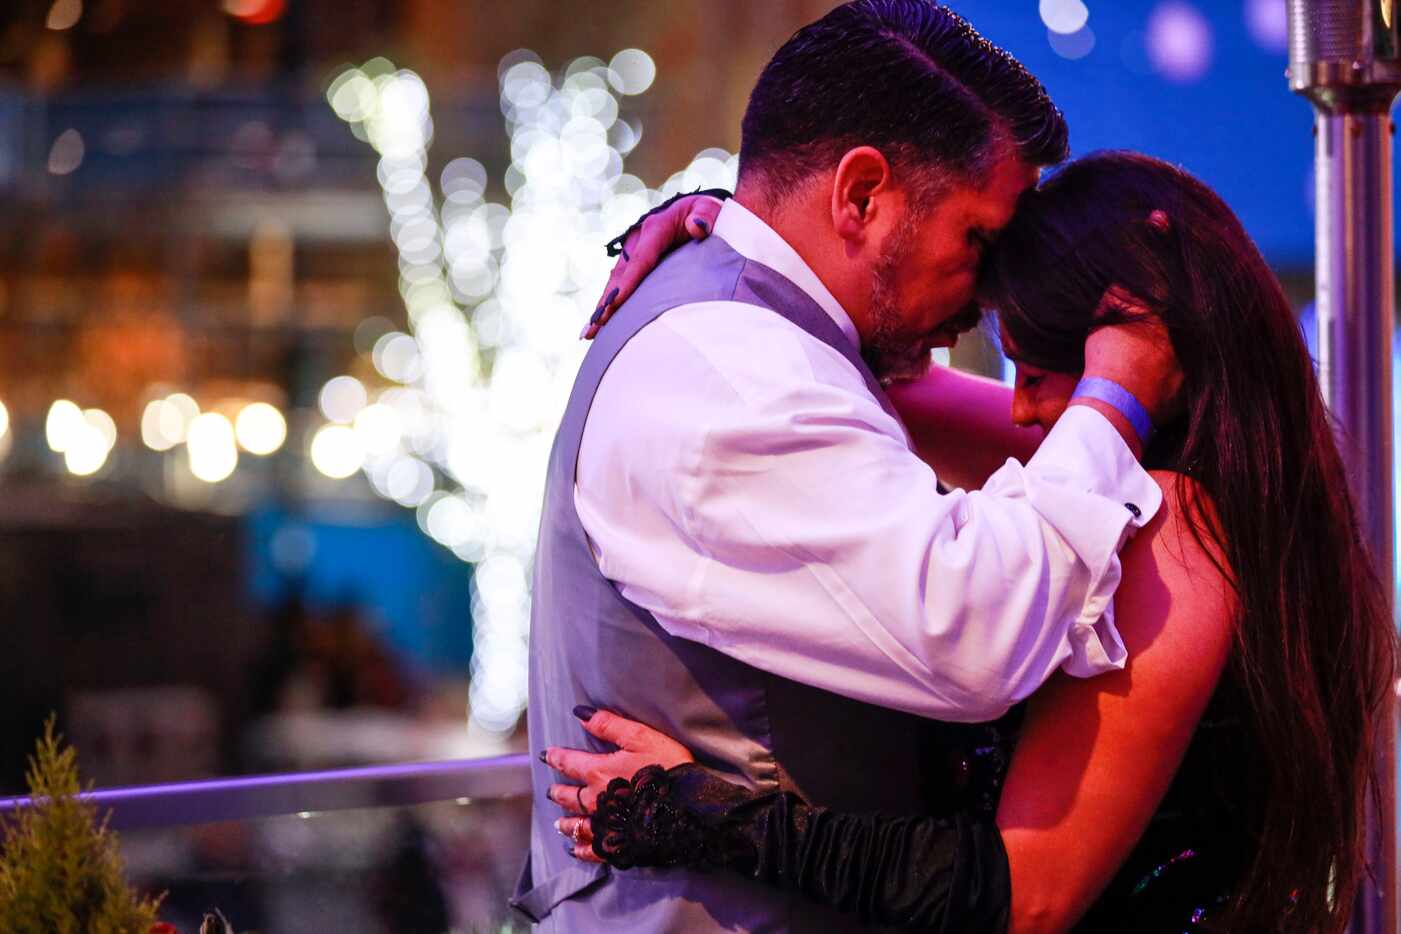 Richard and Jamie Mendoza share a moment together on New Years at The Exchange in Dallas,...